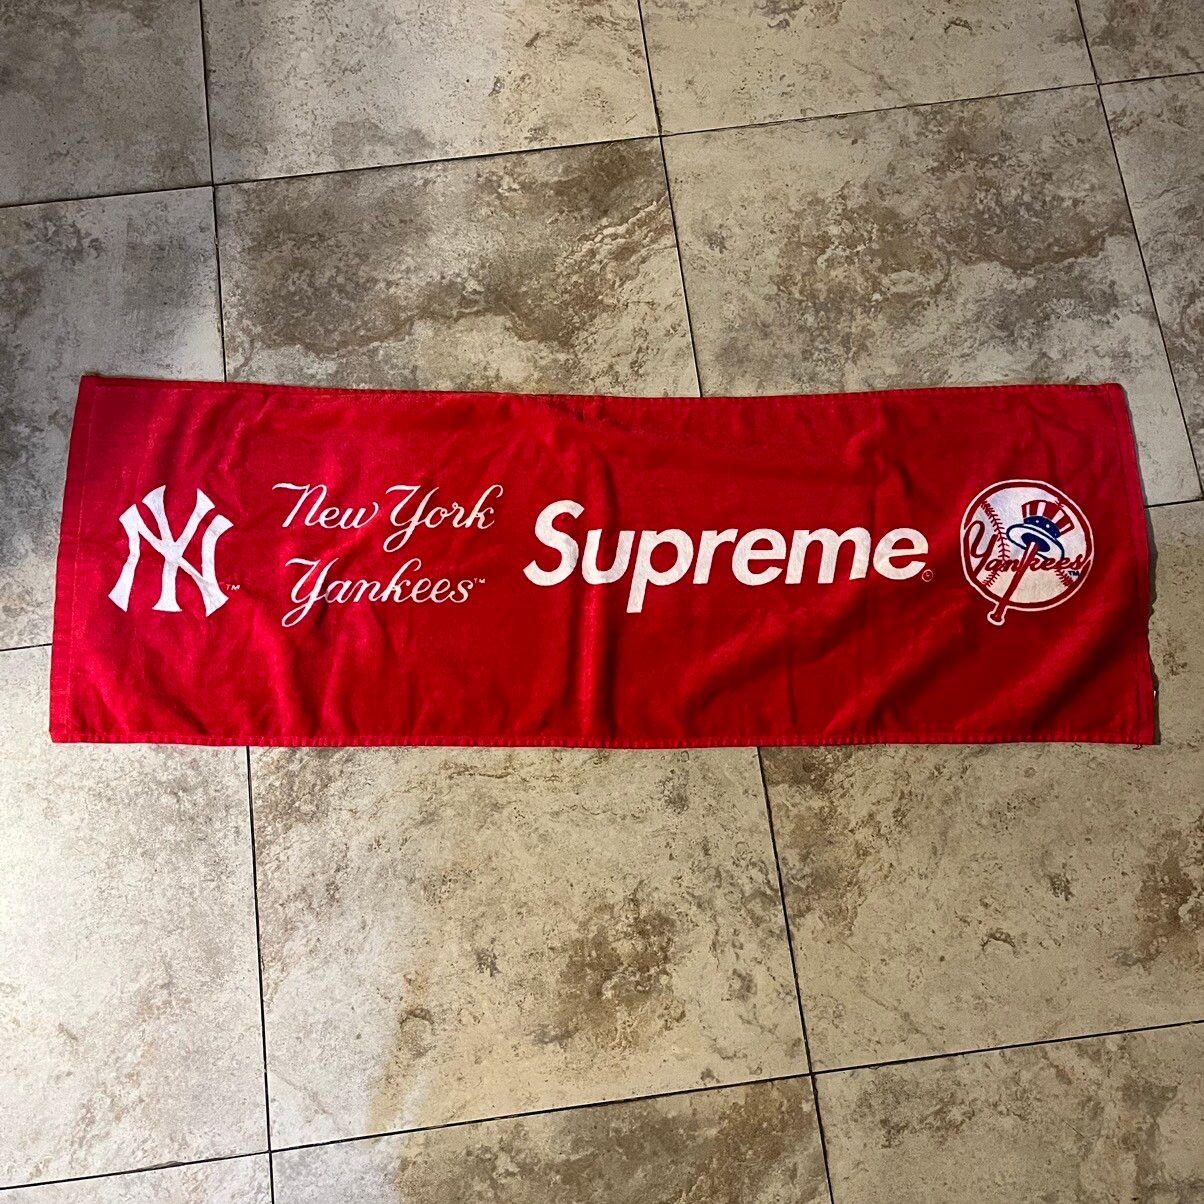 Supreme Supreme - New York Yankees Hand Towel (SS15) - Red | Grailed